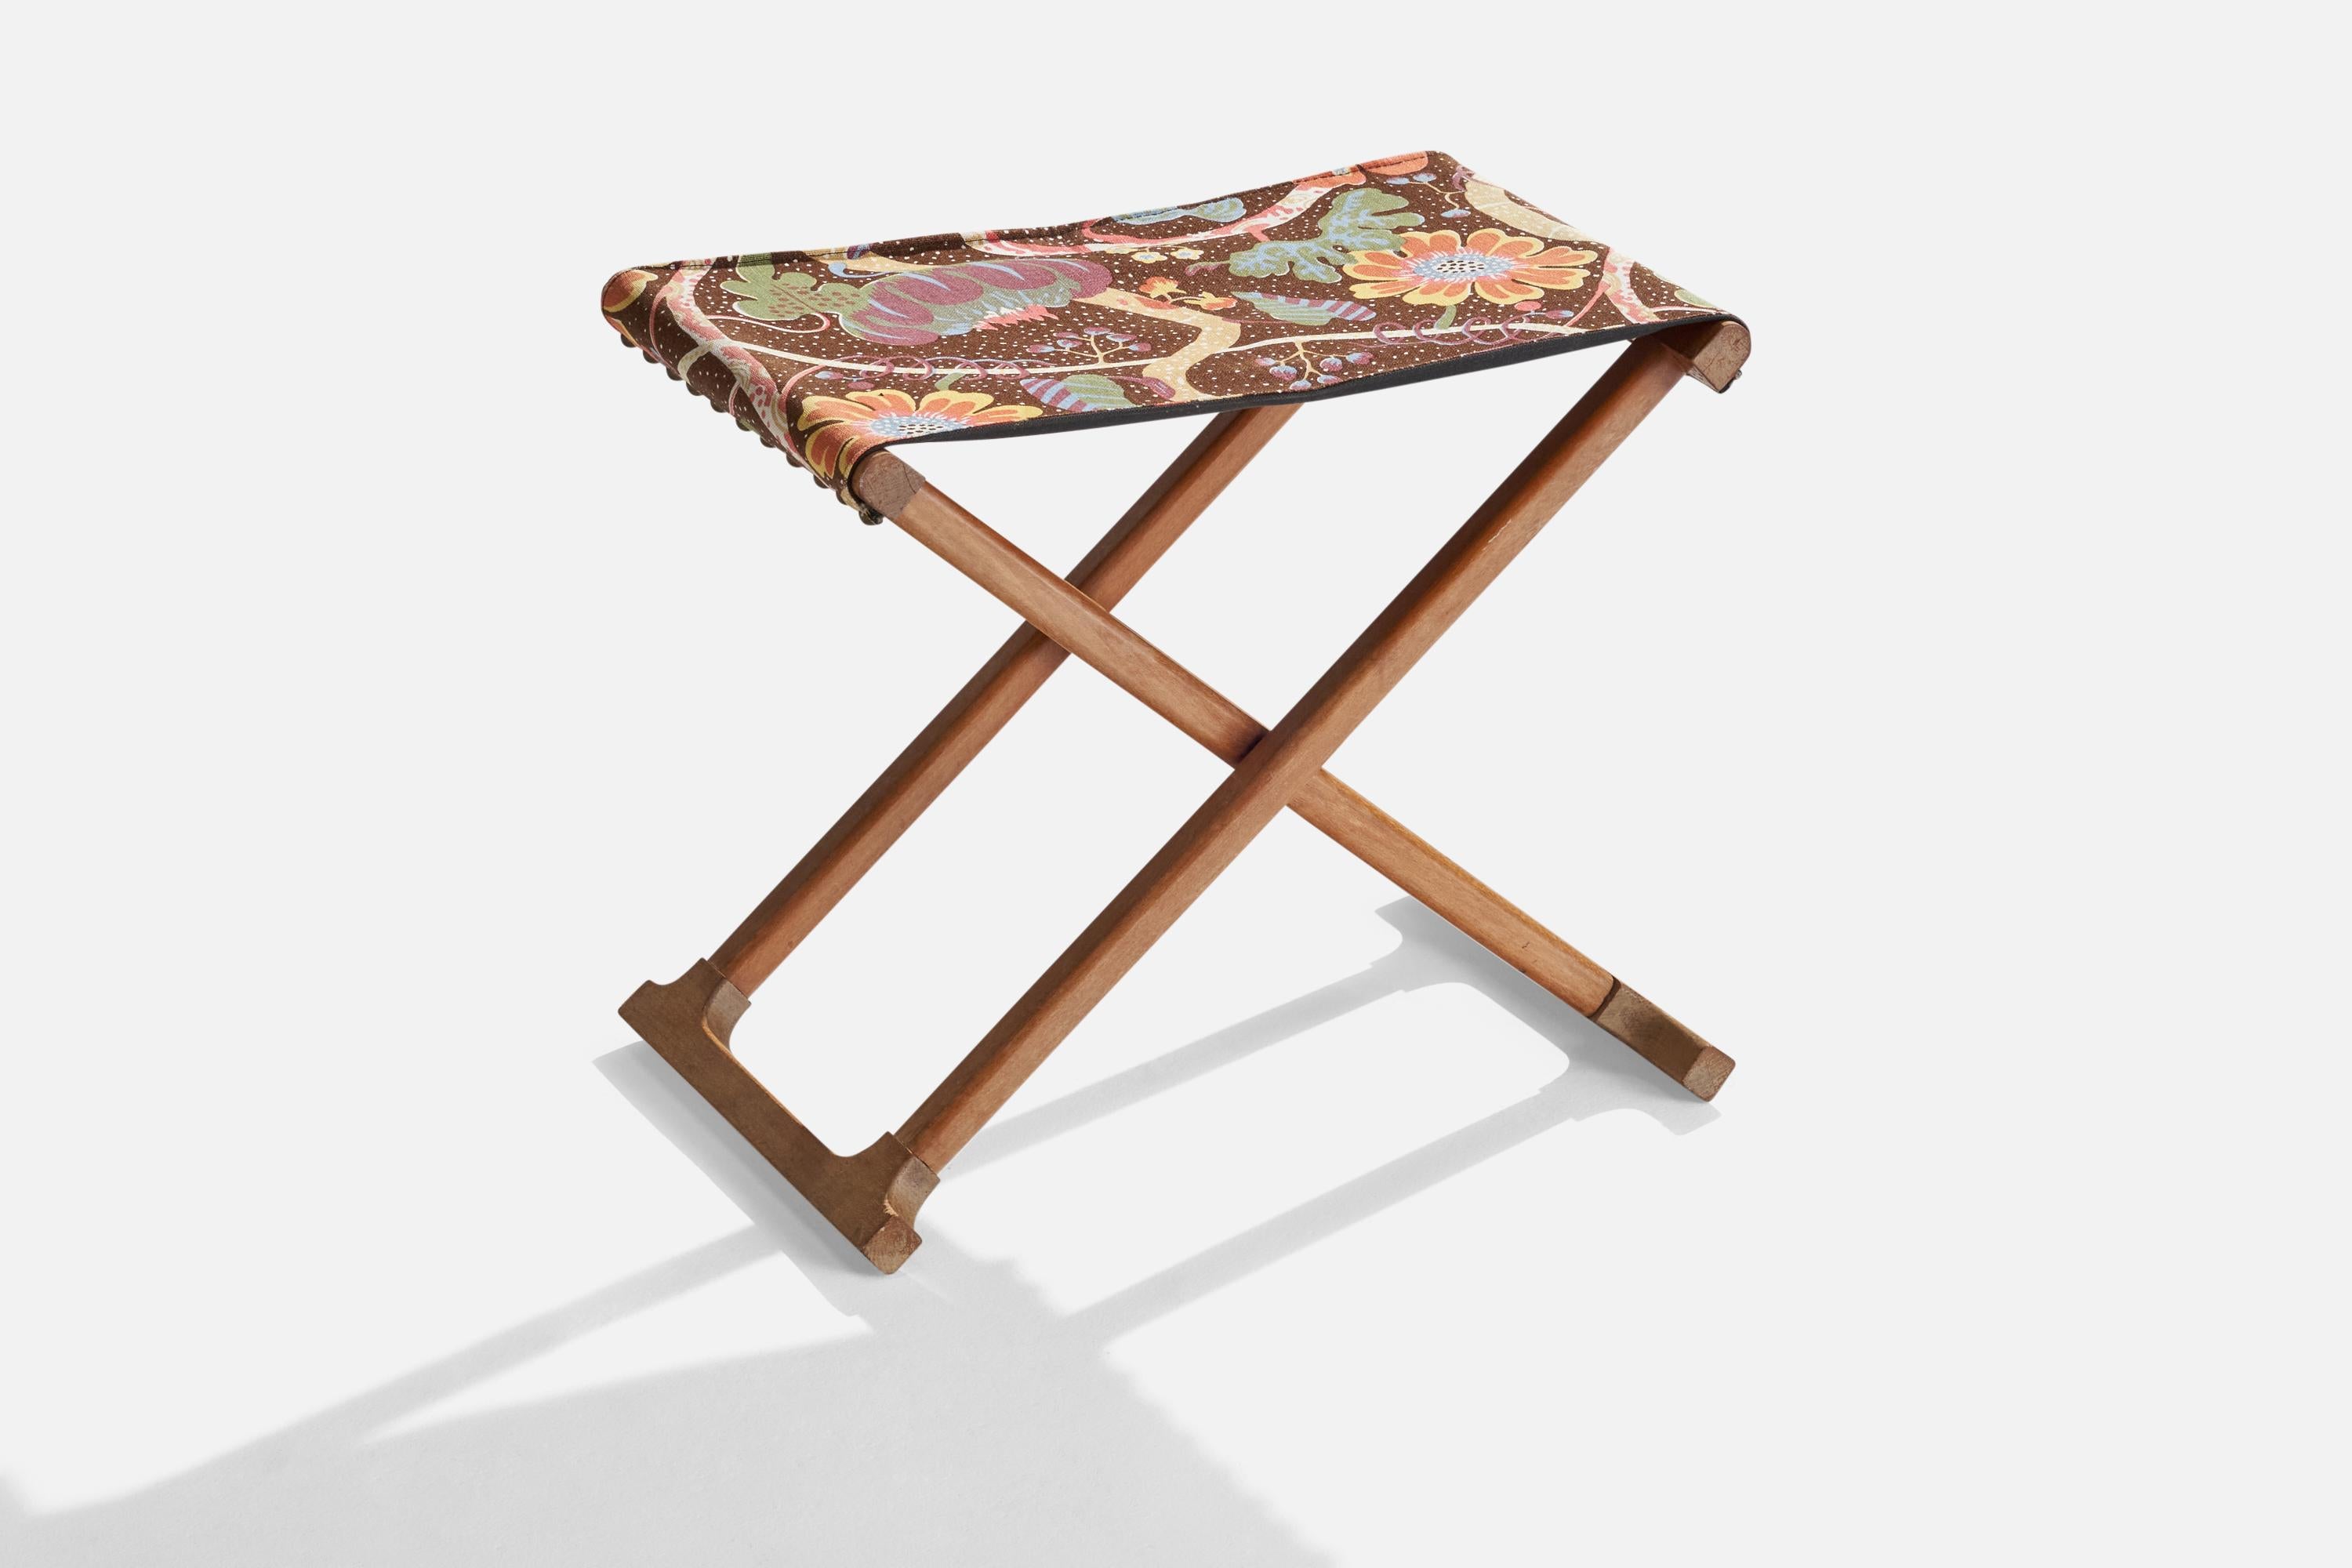 A teak and floral-printed fabric stool designed and produced in Sweden, c. 1950s.

Fabric is designed by Josef Frank, and likely added to the stool at some point in history.

Seat height 16”.